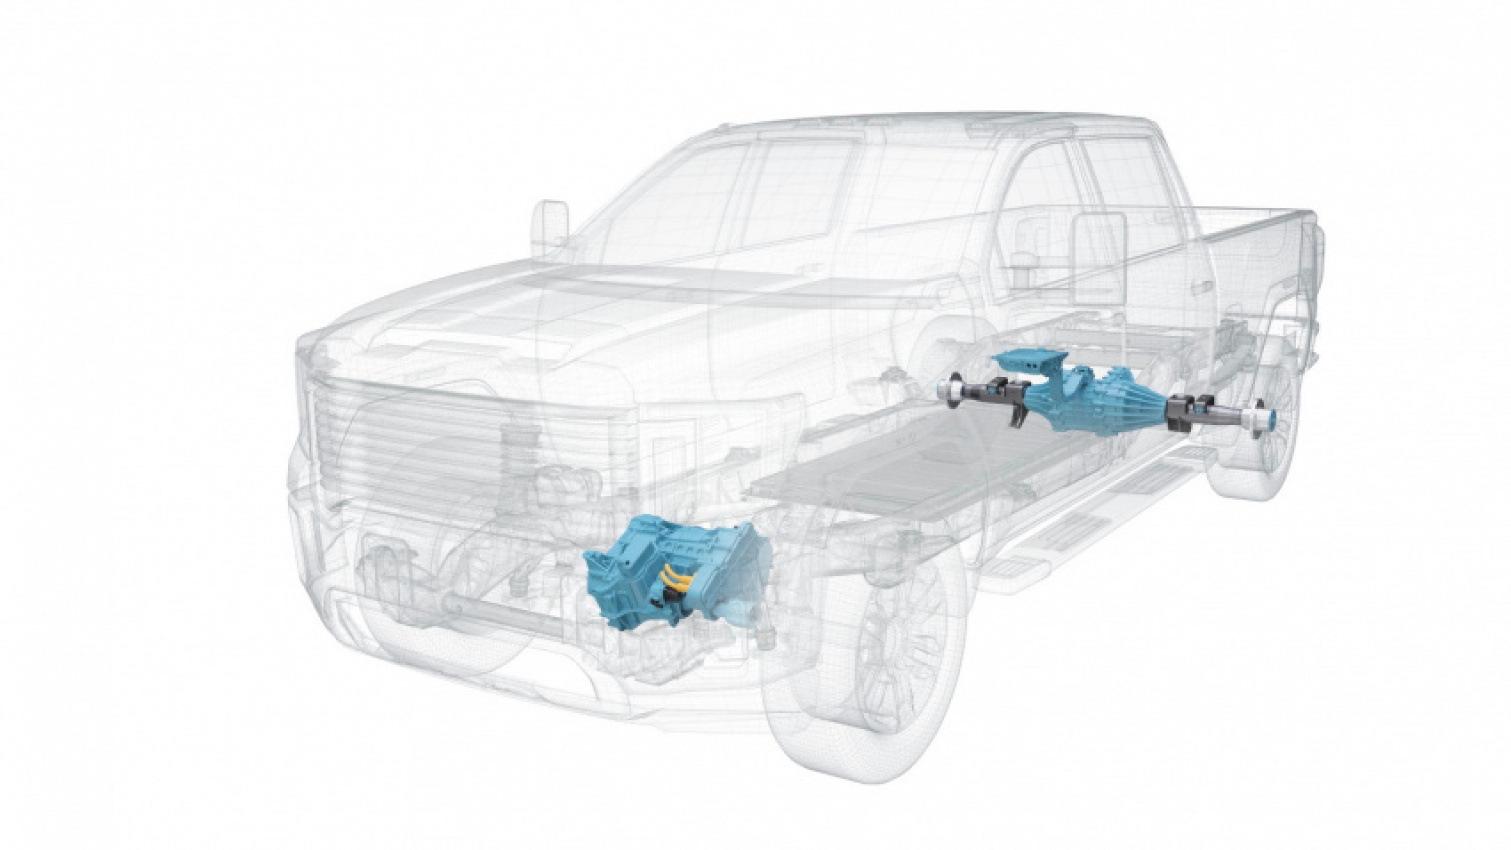 autos, cars, car tech, electric cars, magna, pickup trucks, magna developed a drop-in electric powertrain for heavy-duty pickup trucks